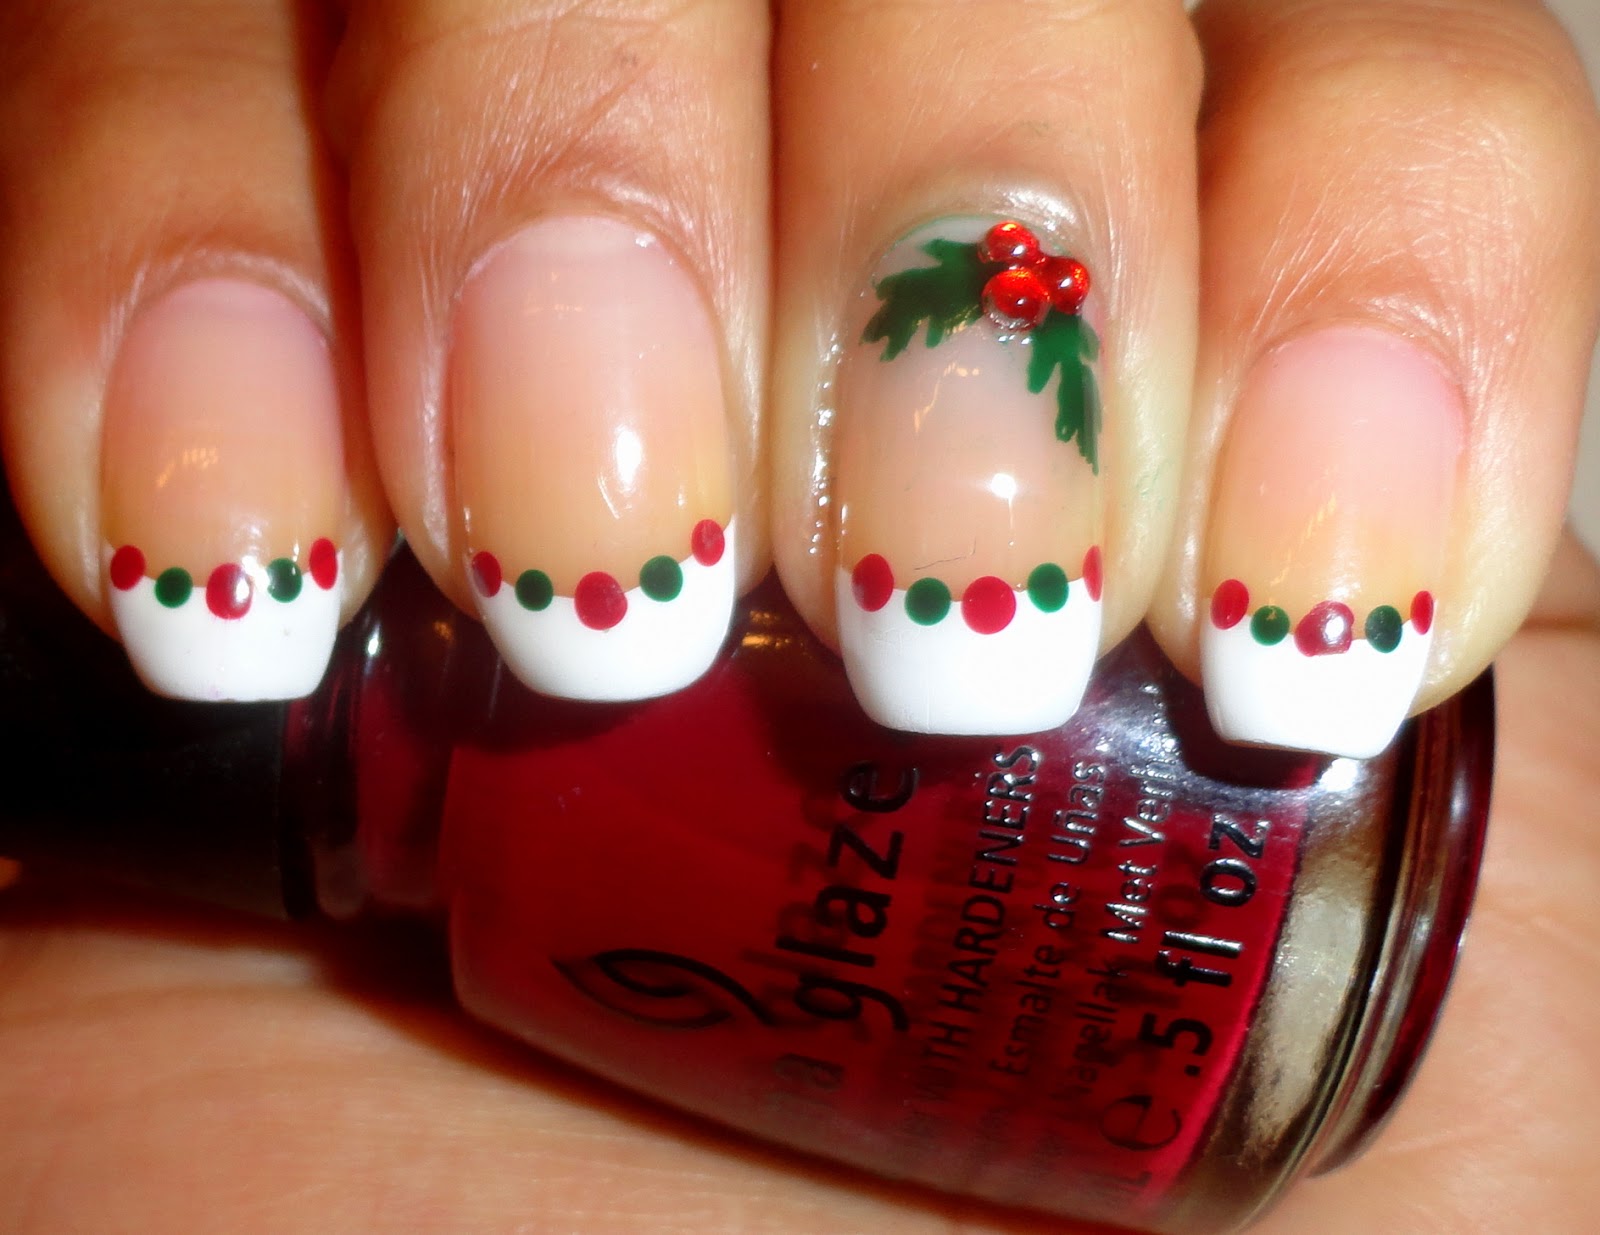 5. Cute and Simple Holly Nail Designs - wide 8